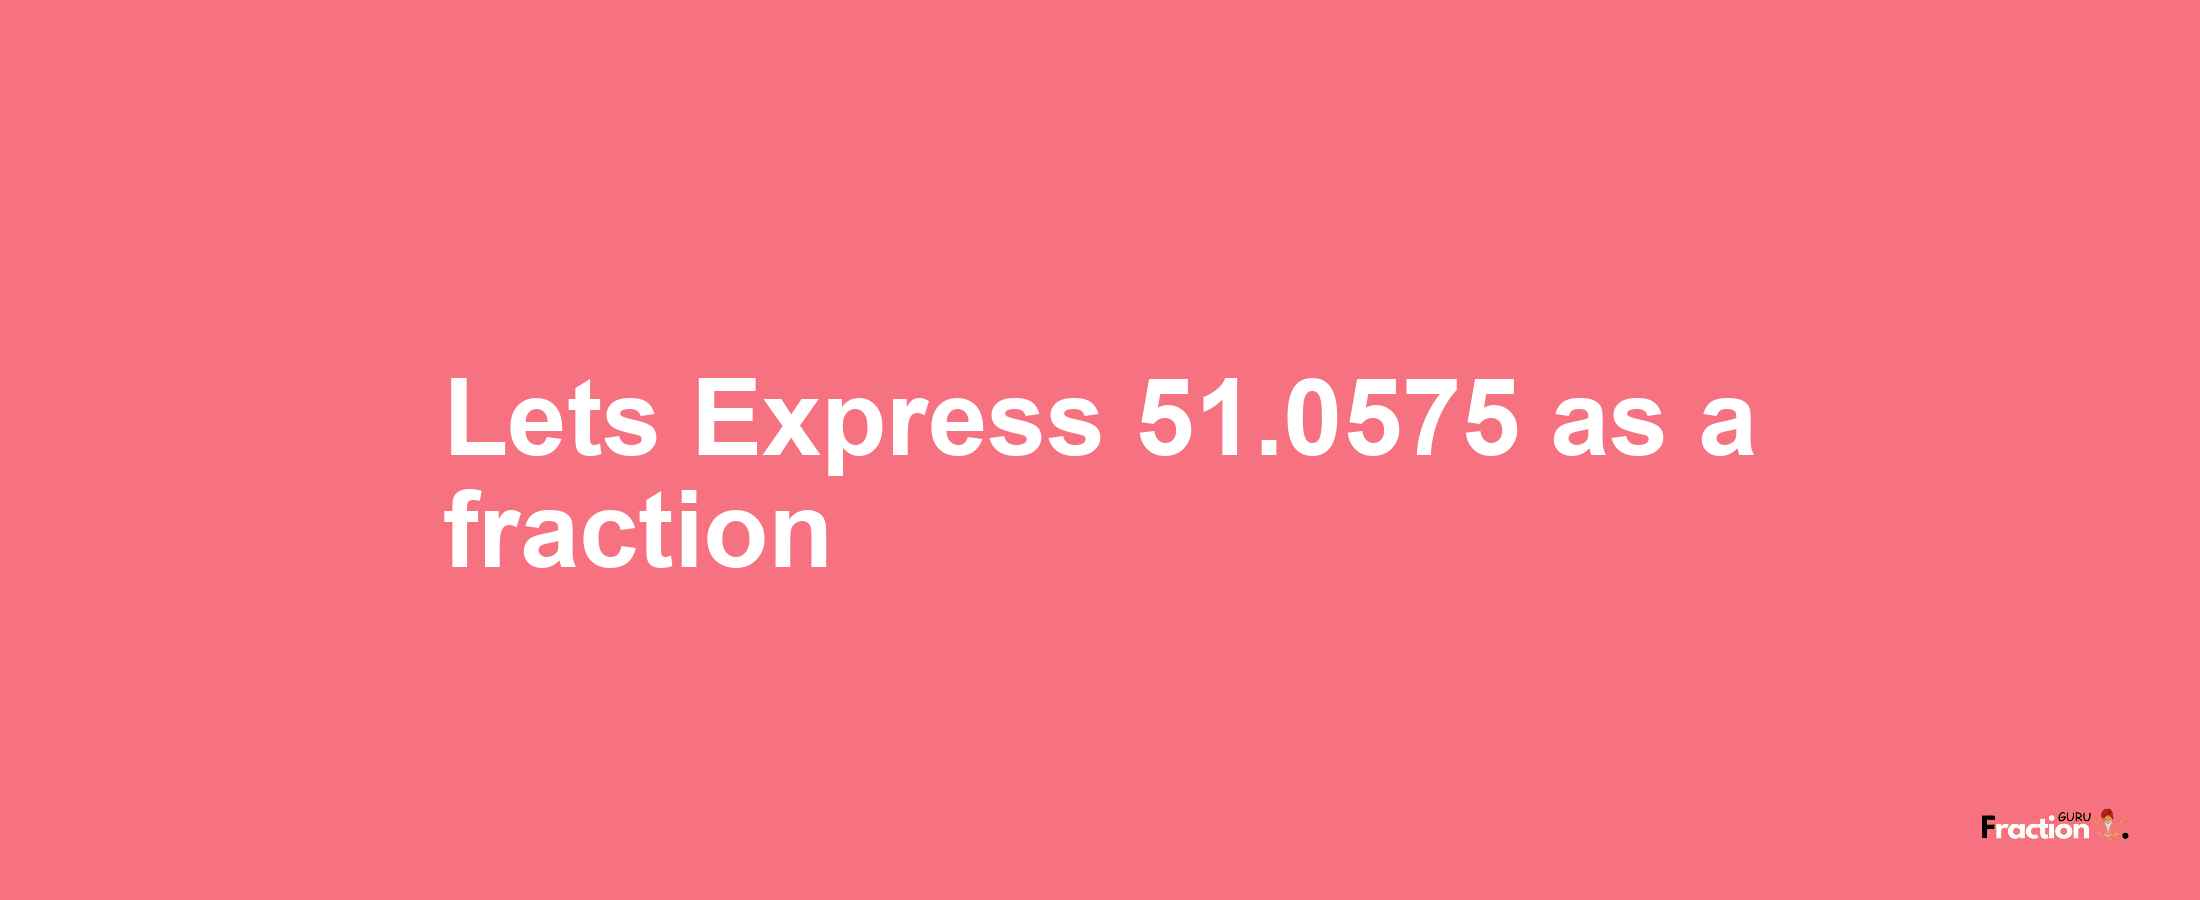 Lets Express 51.0575 as afraction